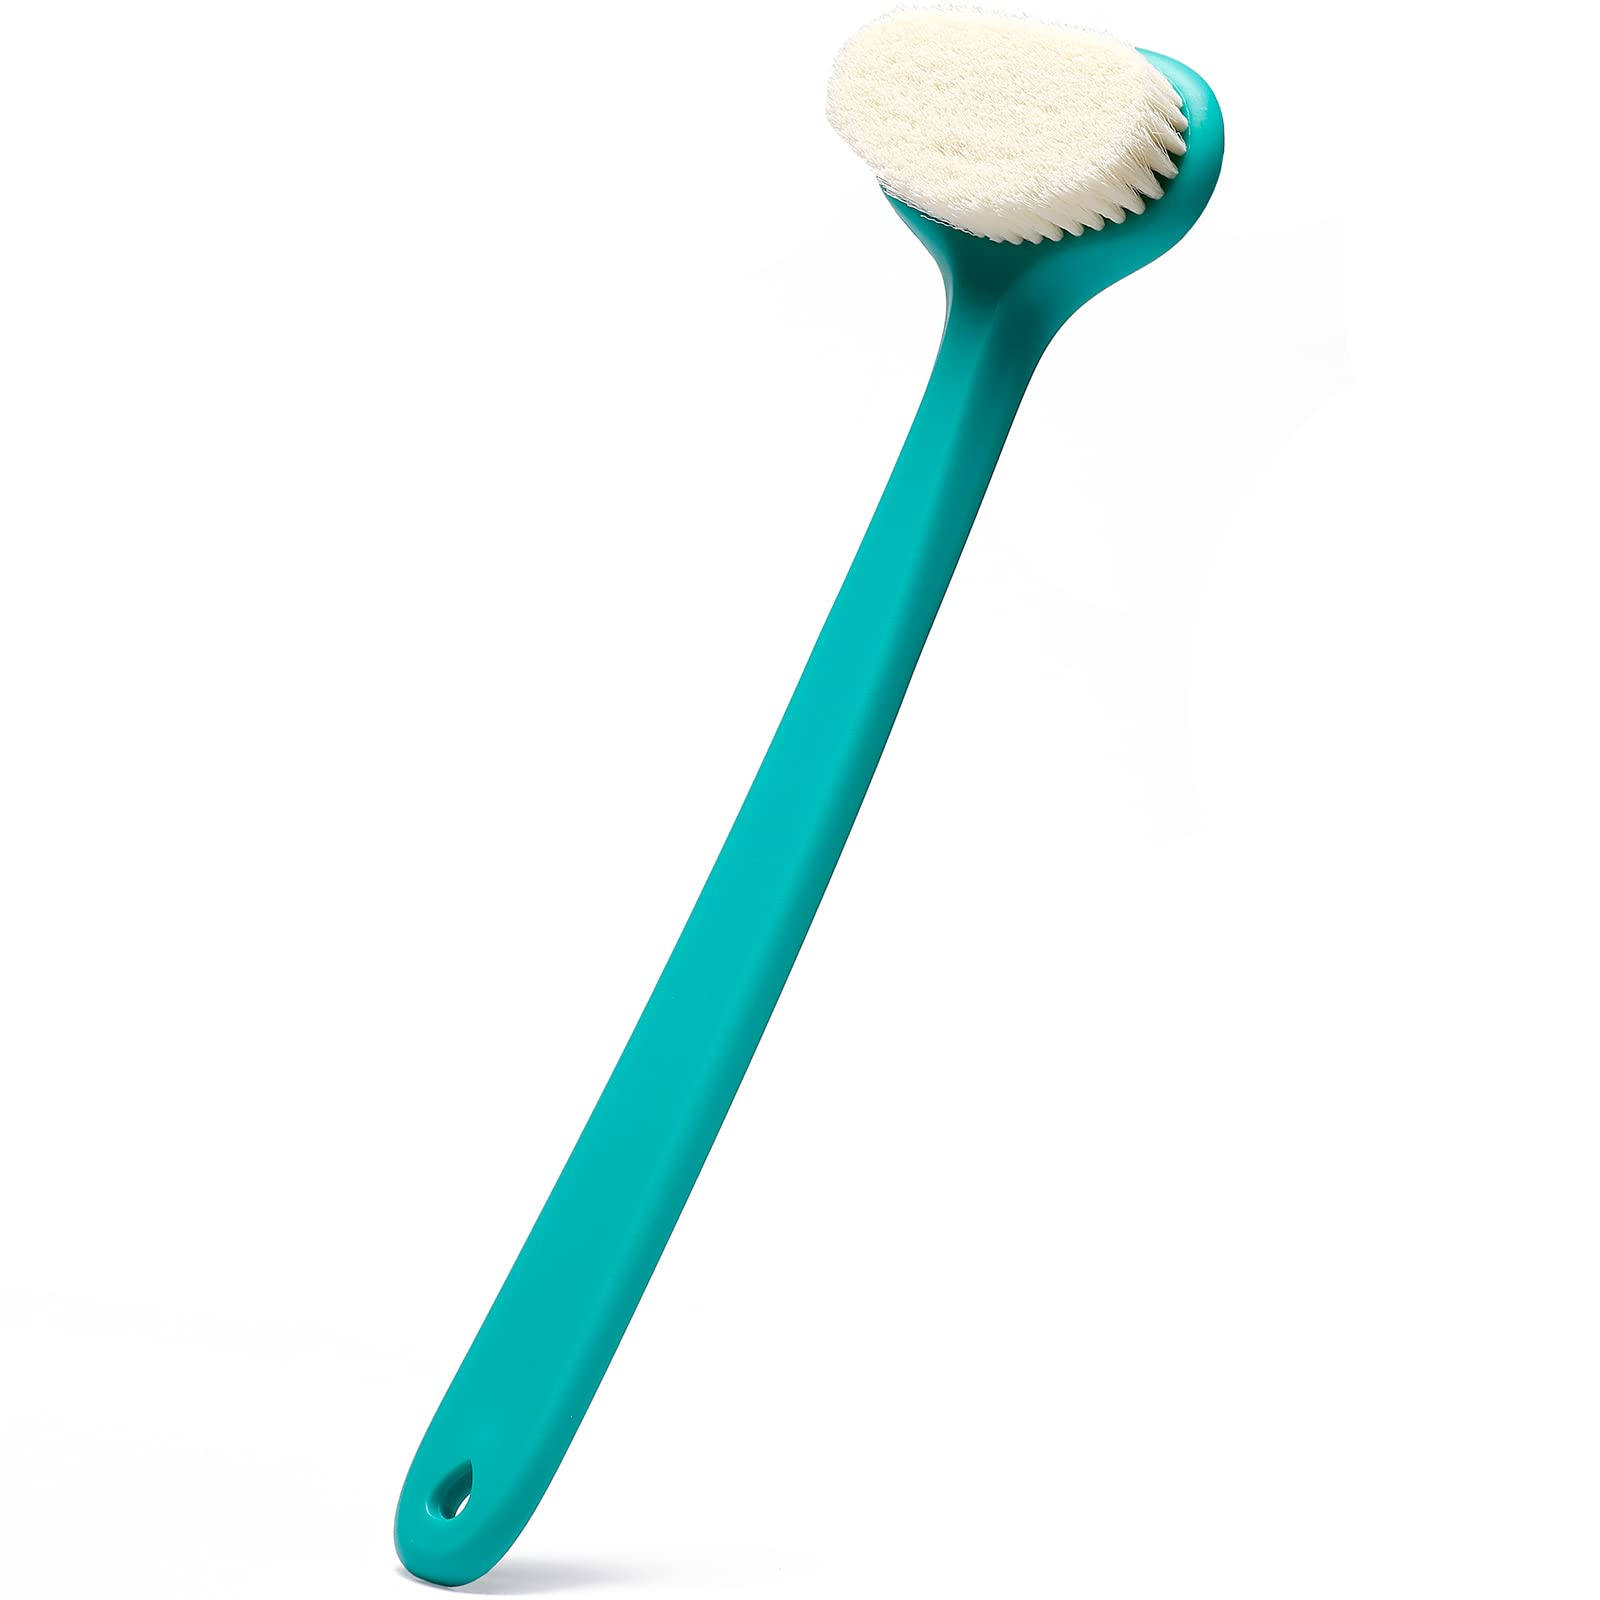 Upgraded Bath Body Brush with Comfy Bristles Long Handle Gentle Exfoliation Improve Skin's Health and Beauty Bath Shower Wet or Dry Brushing Body Brush (14 inch, Green)